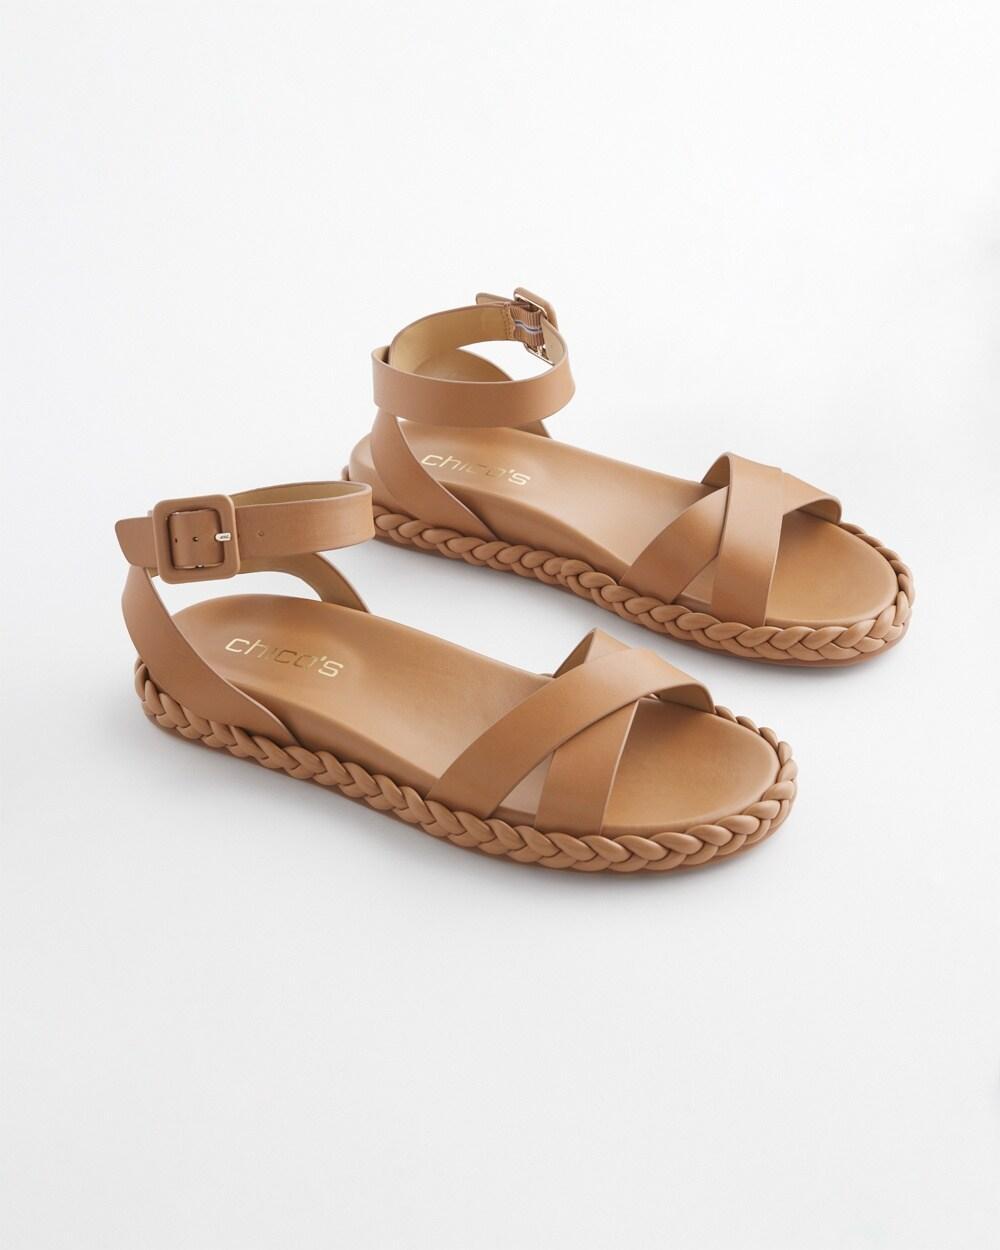 Chico's Leather Braided Sandals Product Image